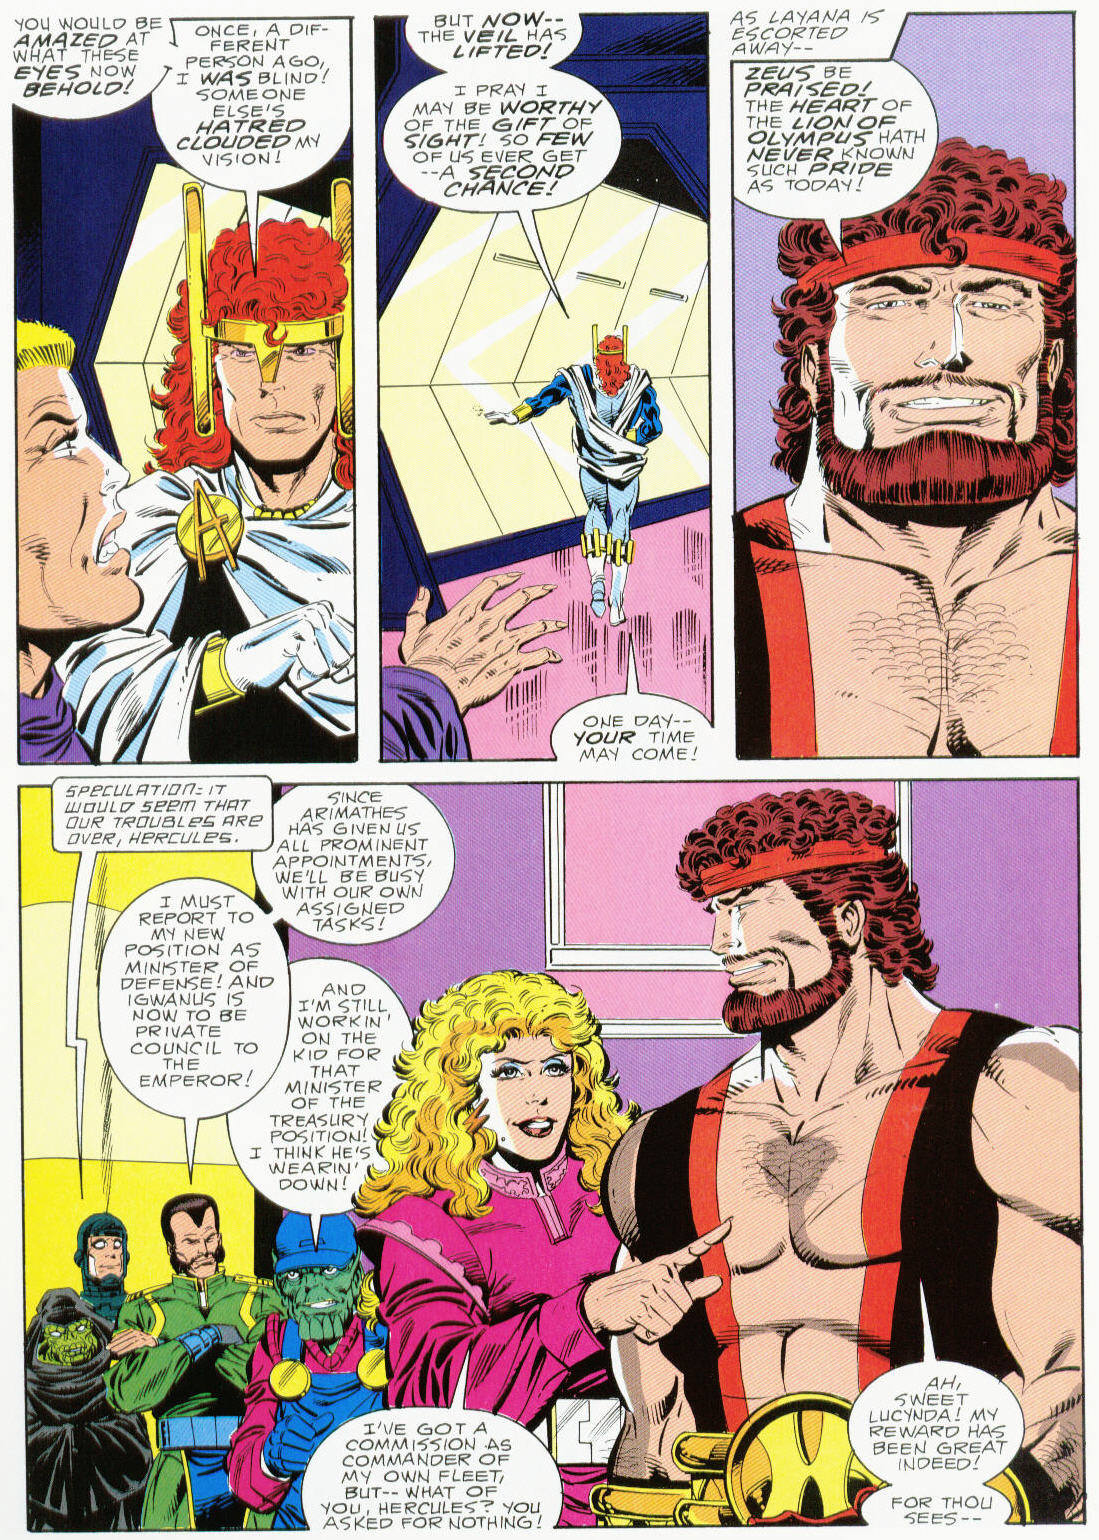 Marvel Graphic Novel issue 37 - Hercules Prince of Power - Full Circle - Page 78